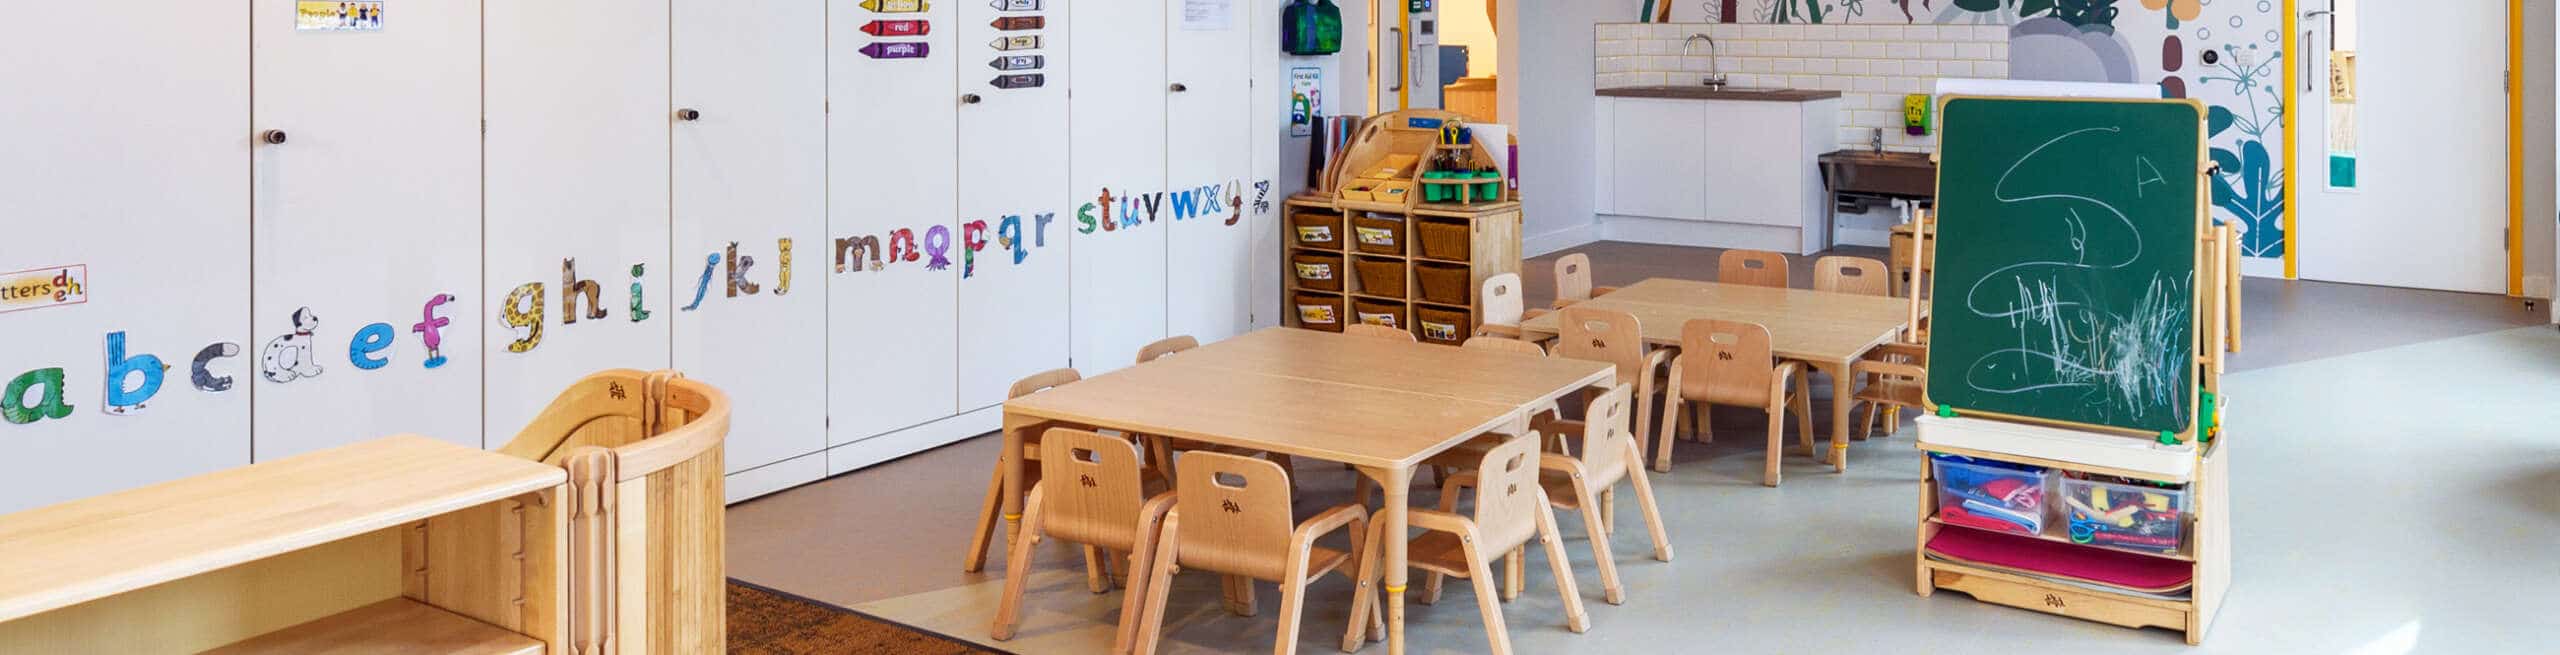 Childrens daycare interior wooden tables and chalkboard cover image